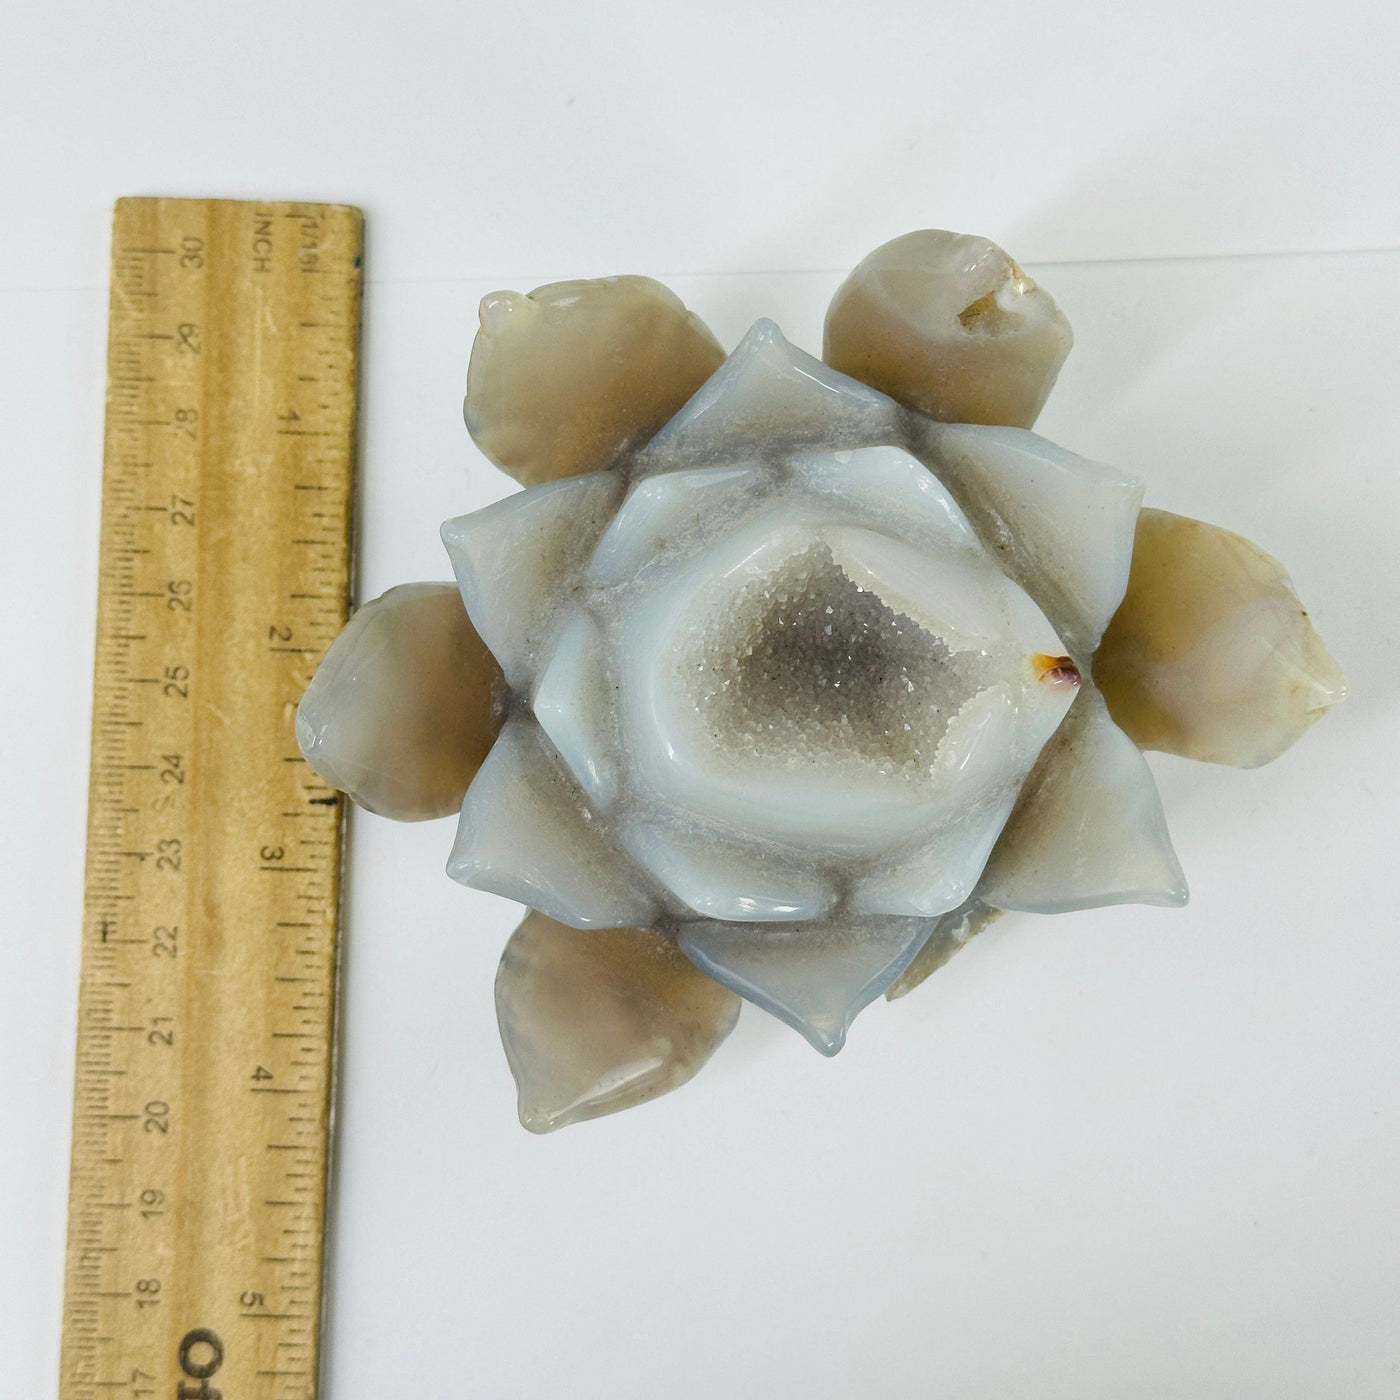 agate flower next to a ruler for size reference